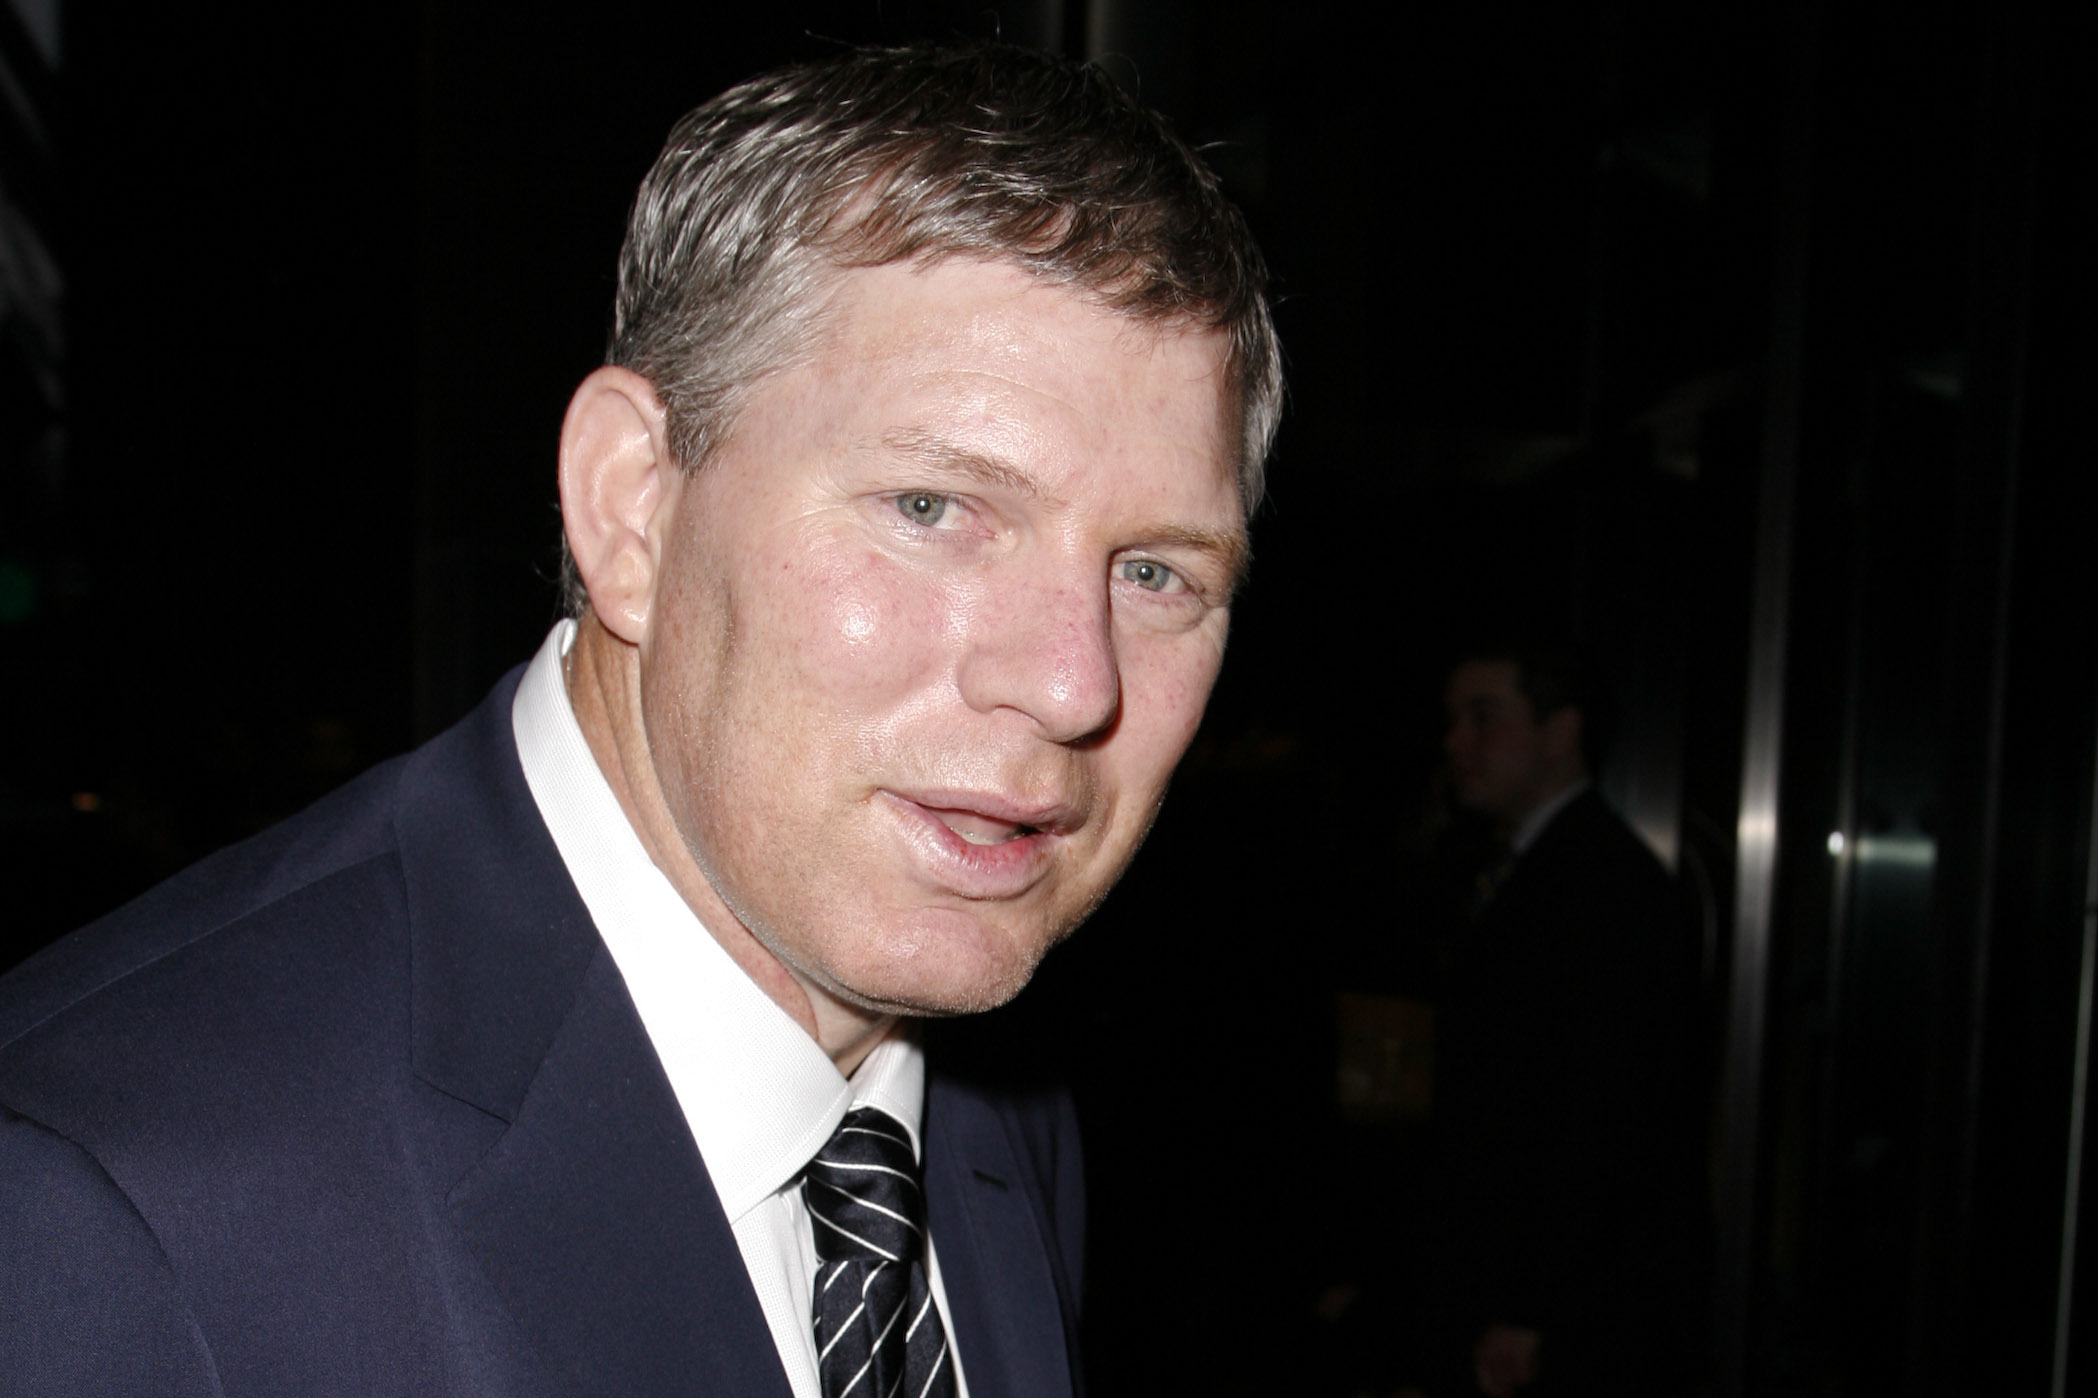 Lenny Dykstra: Nails Continues to Prove He's Delusional in Face of Guilt, News, Scores, Highlights, Stats, and Rumors